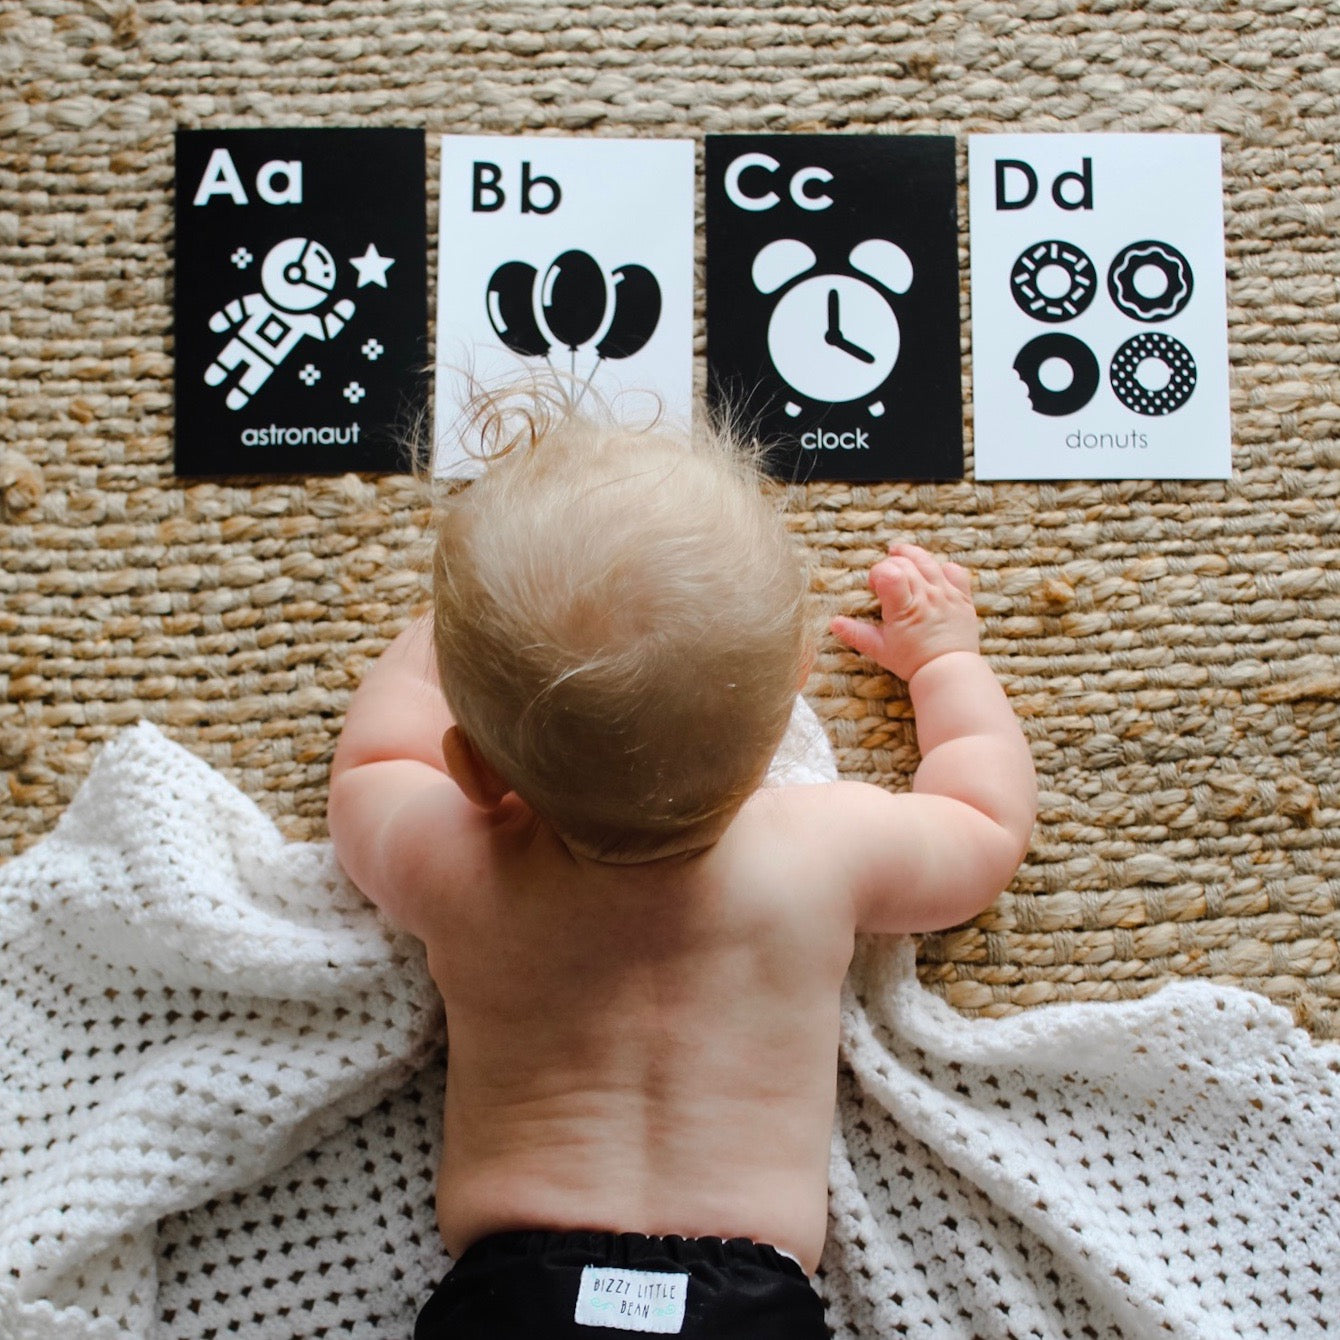 My Alphabet Flash Cards by RMS Publishing from Bear & Moo